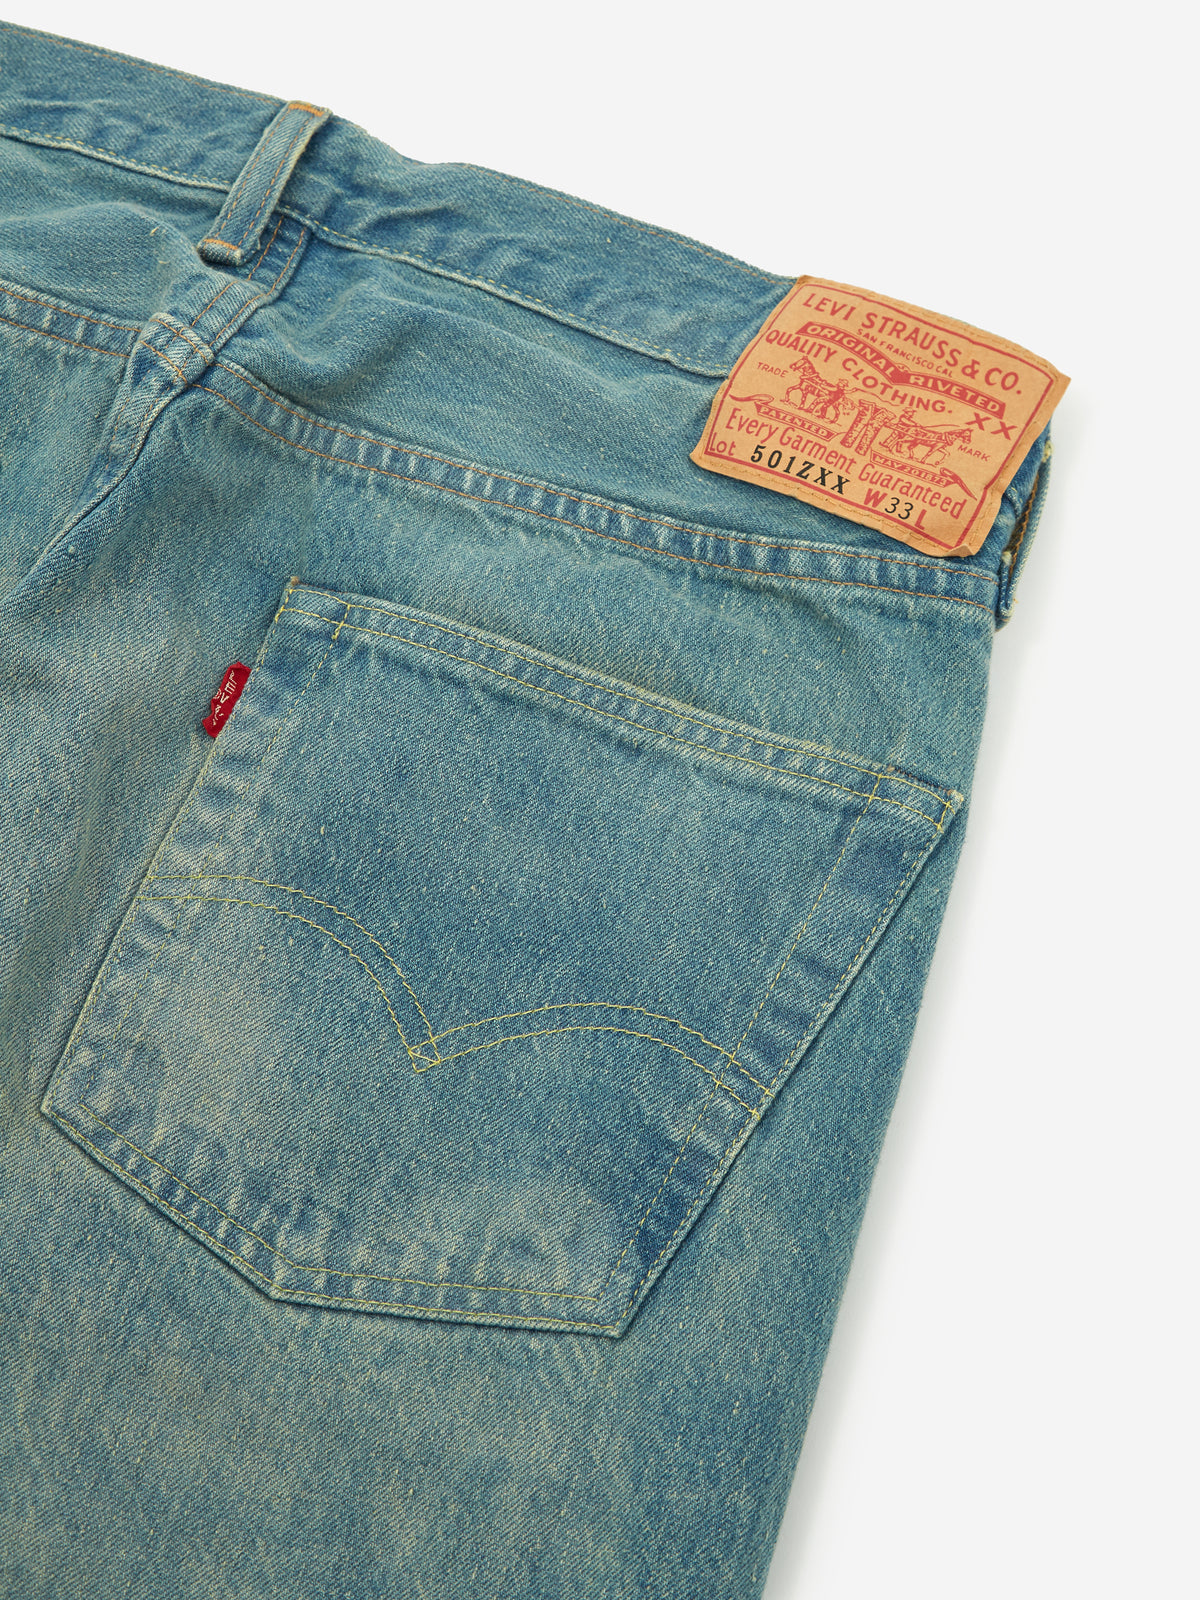 Find High-End Items at Affordable Prices when you shop with Levis